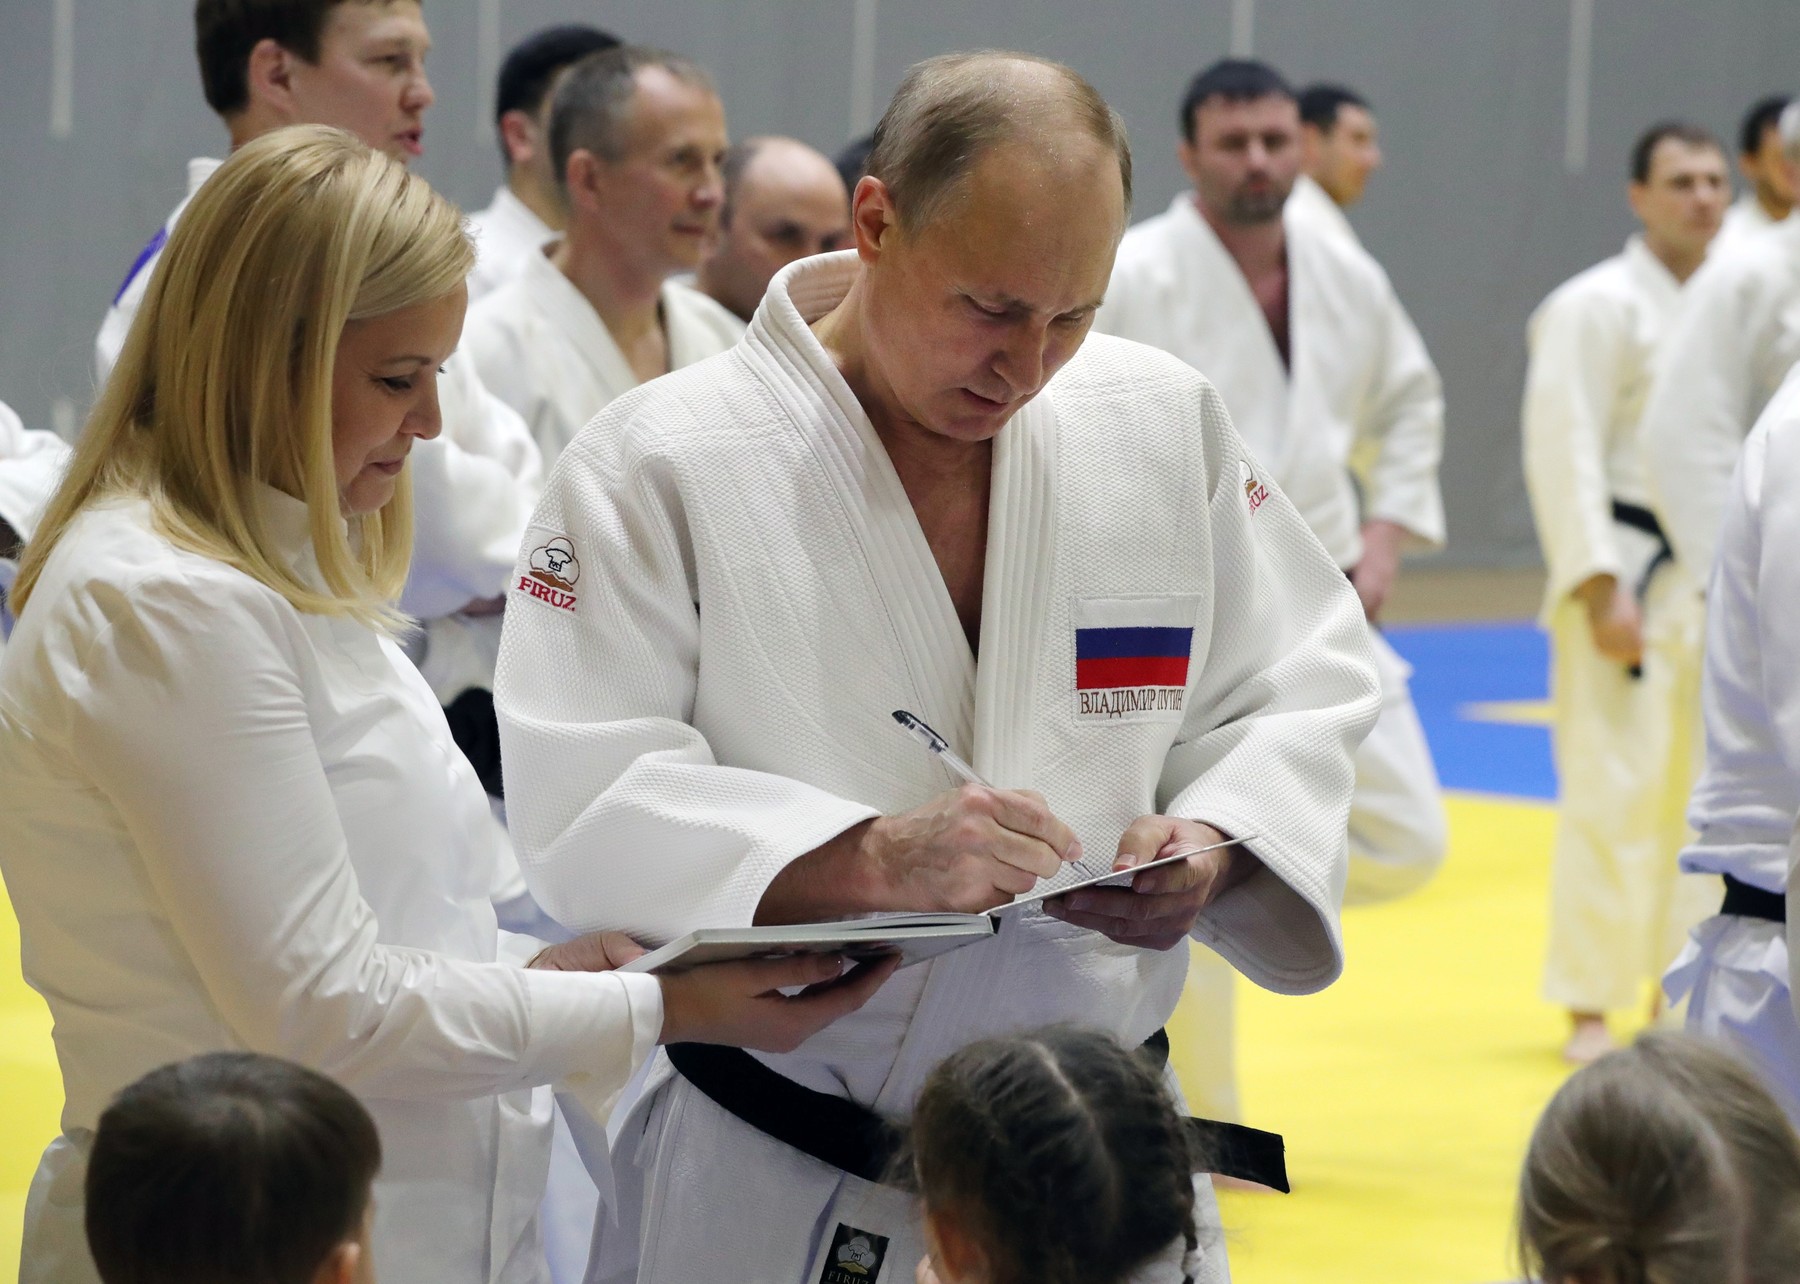 5782431 14.02.2019 February 14, 2019. President of Russia Vladimir Putin during a judo training session on tatami at the Yug-Sport sport and training complex.,Image: 413920233, License: Rights-managed, Restrictions: , Model Release: no, Credit line: Profimedia